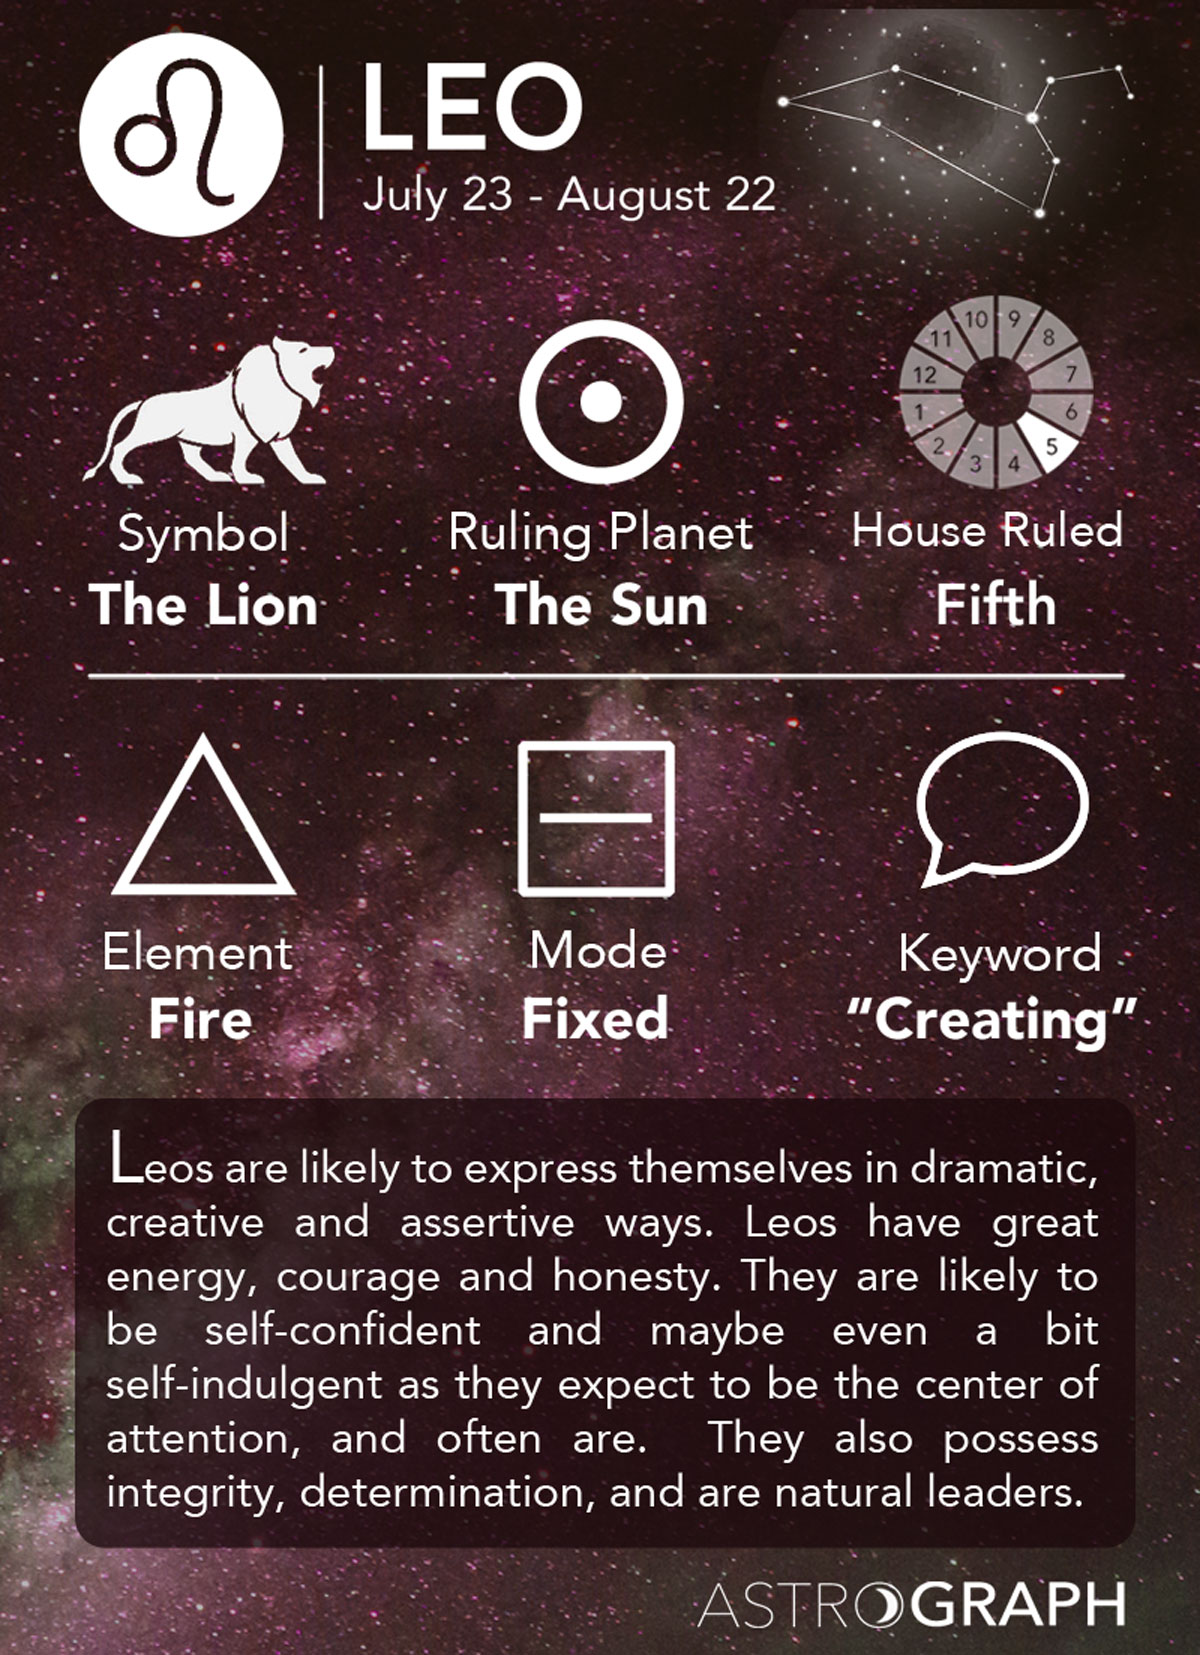 What planet is Leo ruled by?